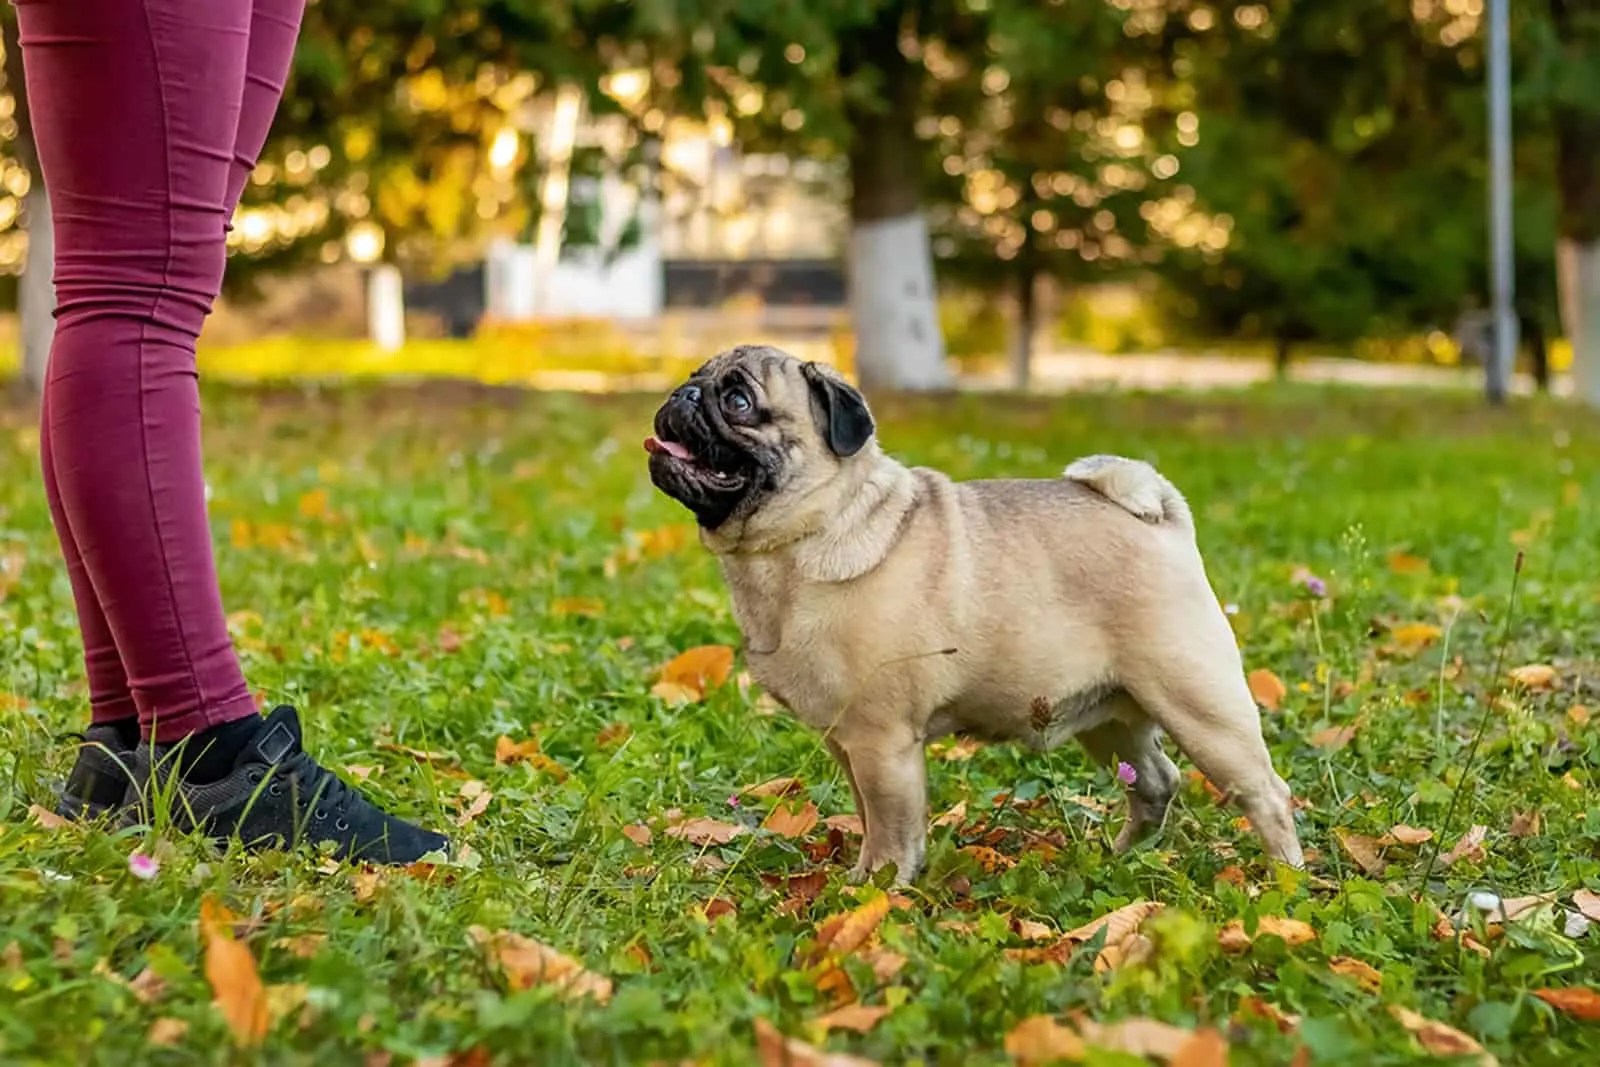 pug dog looks carefully at its owner in the park